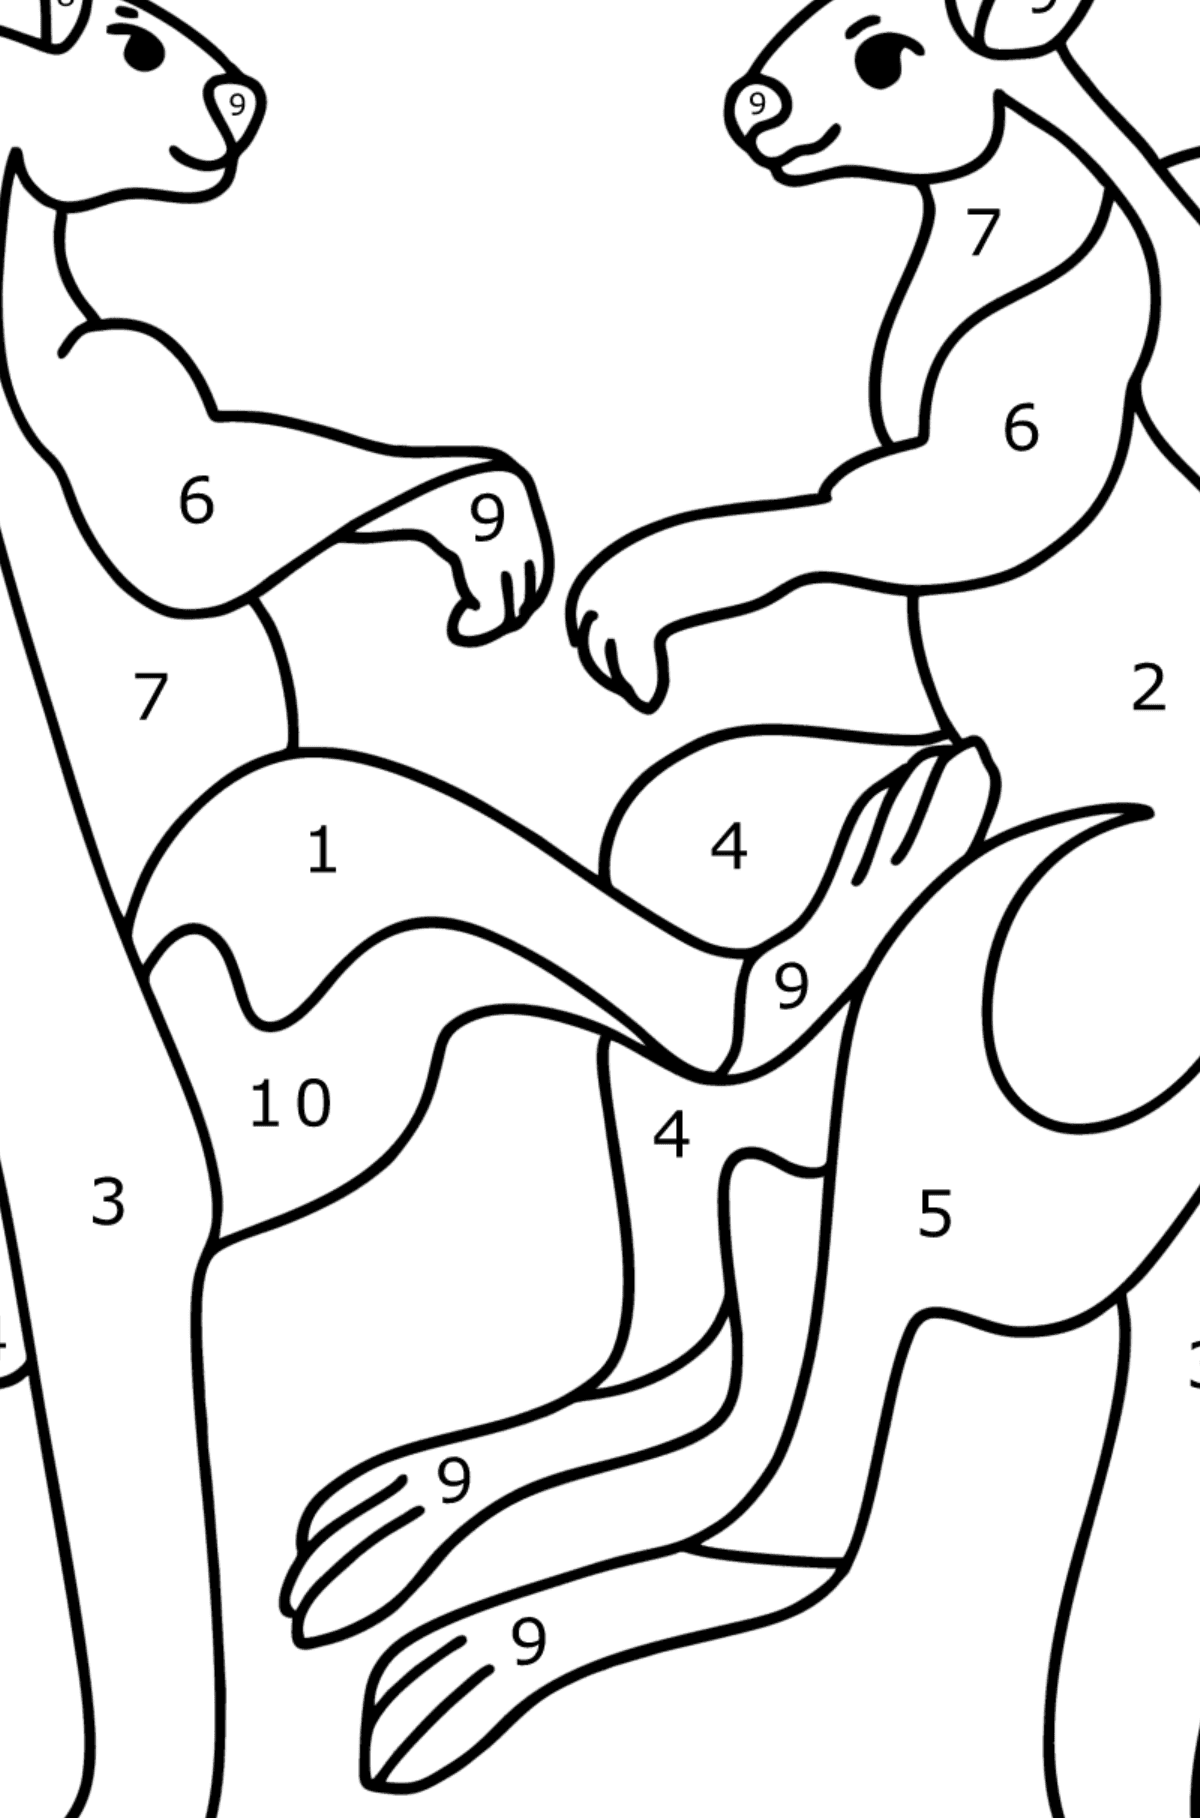 Kangaroo Wrestling coloring page - Coloring by Numbers for Kids